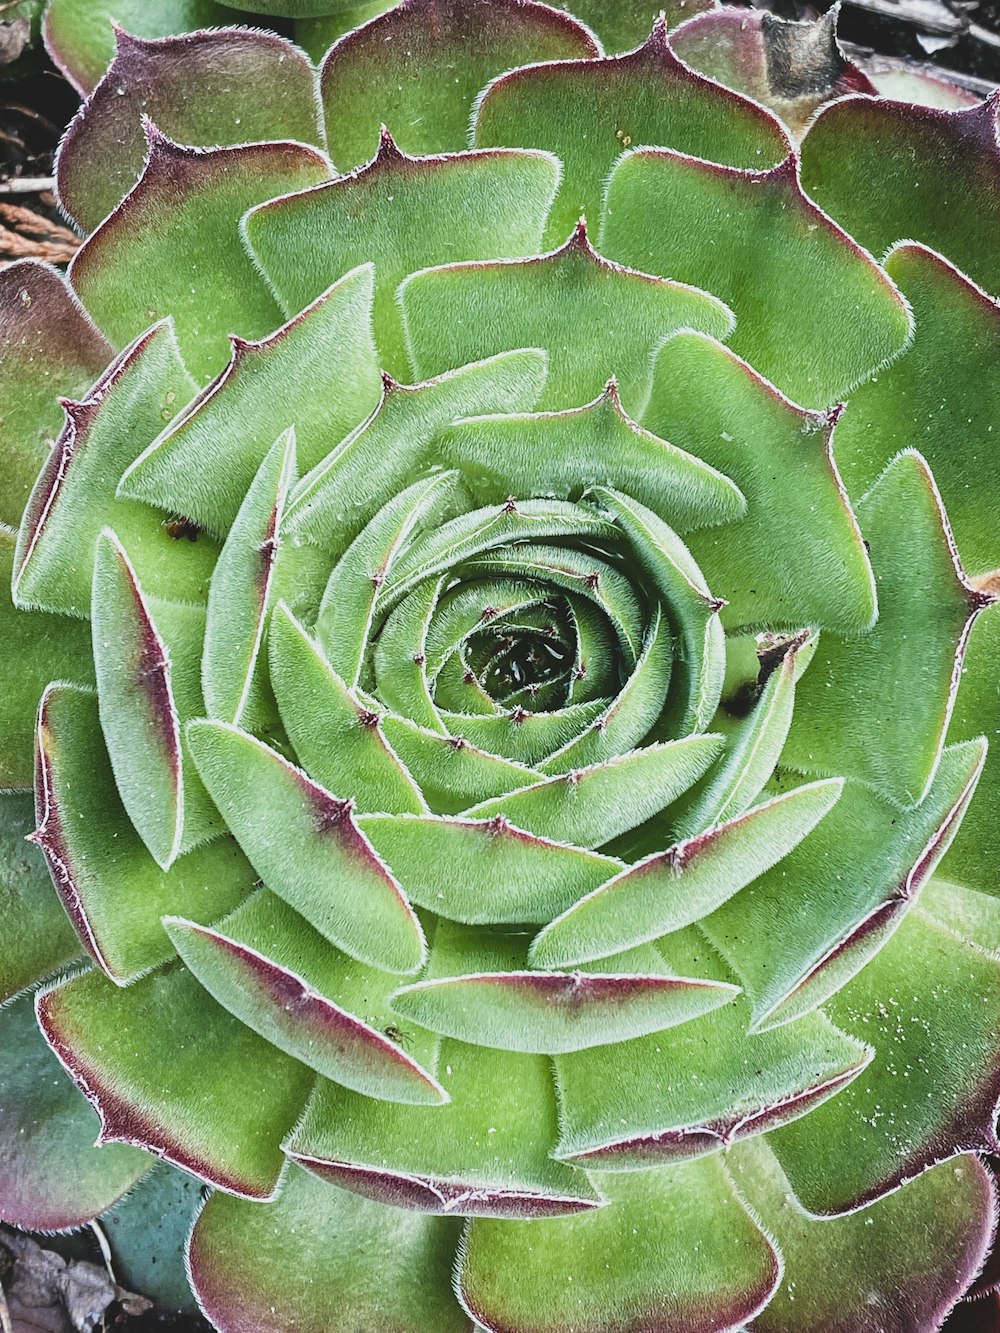 a close up of a green and purple plant